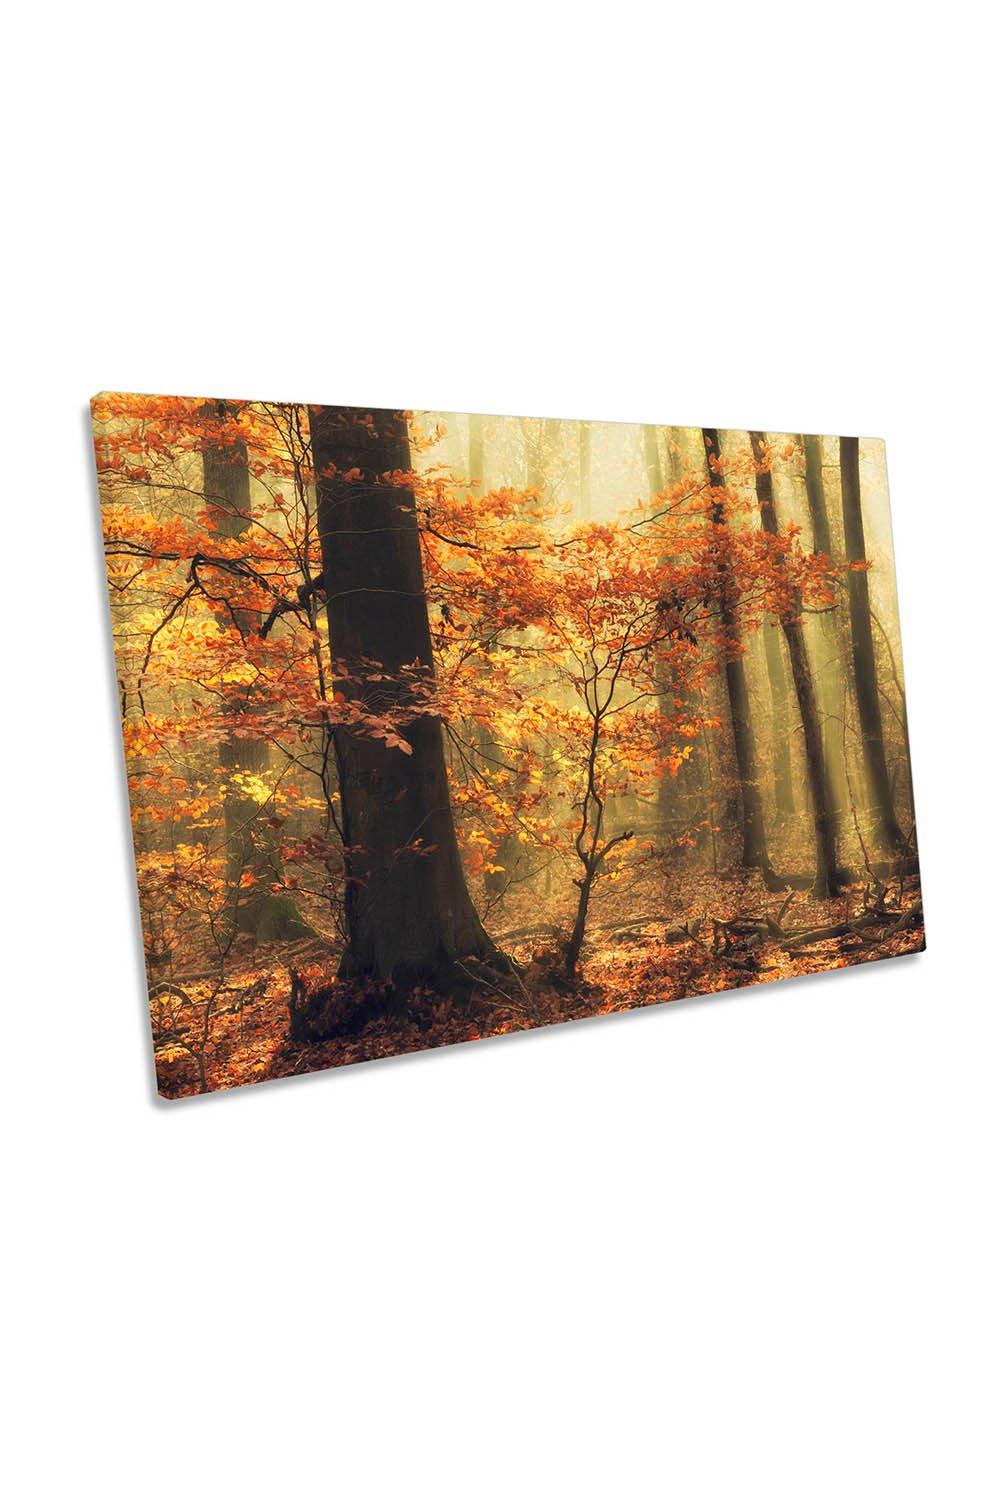 Orange Fall Autumn Forest Trees Canvas Wall Art Picture Print